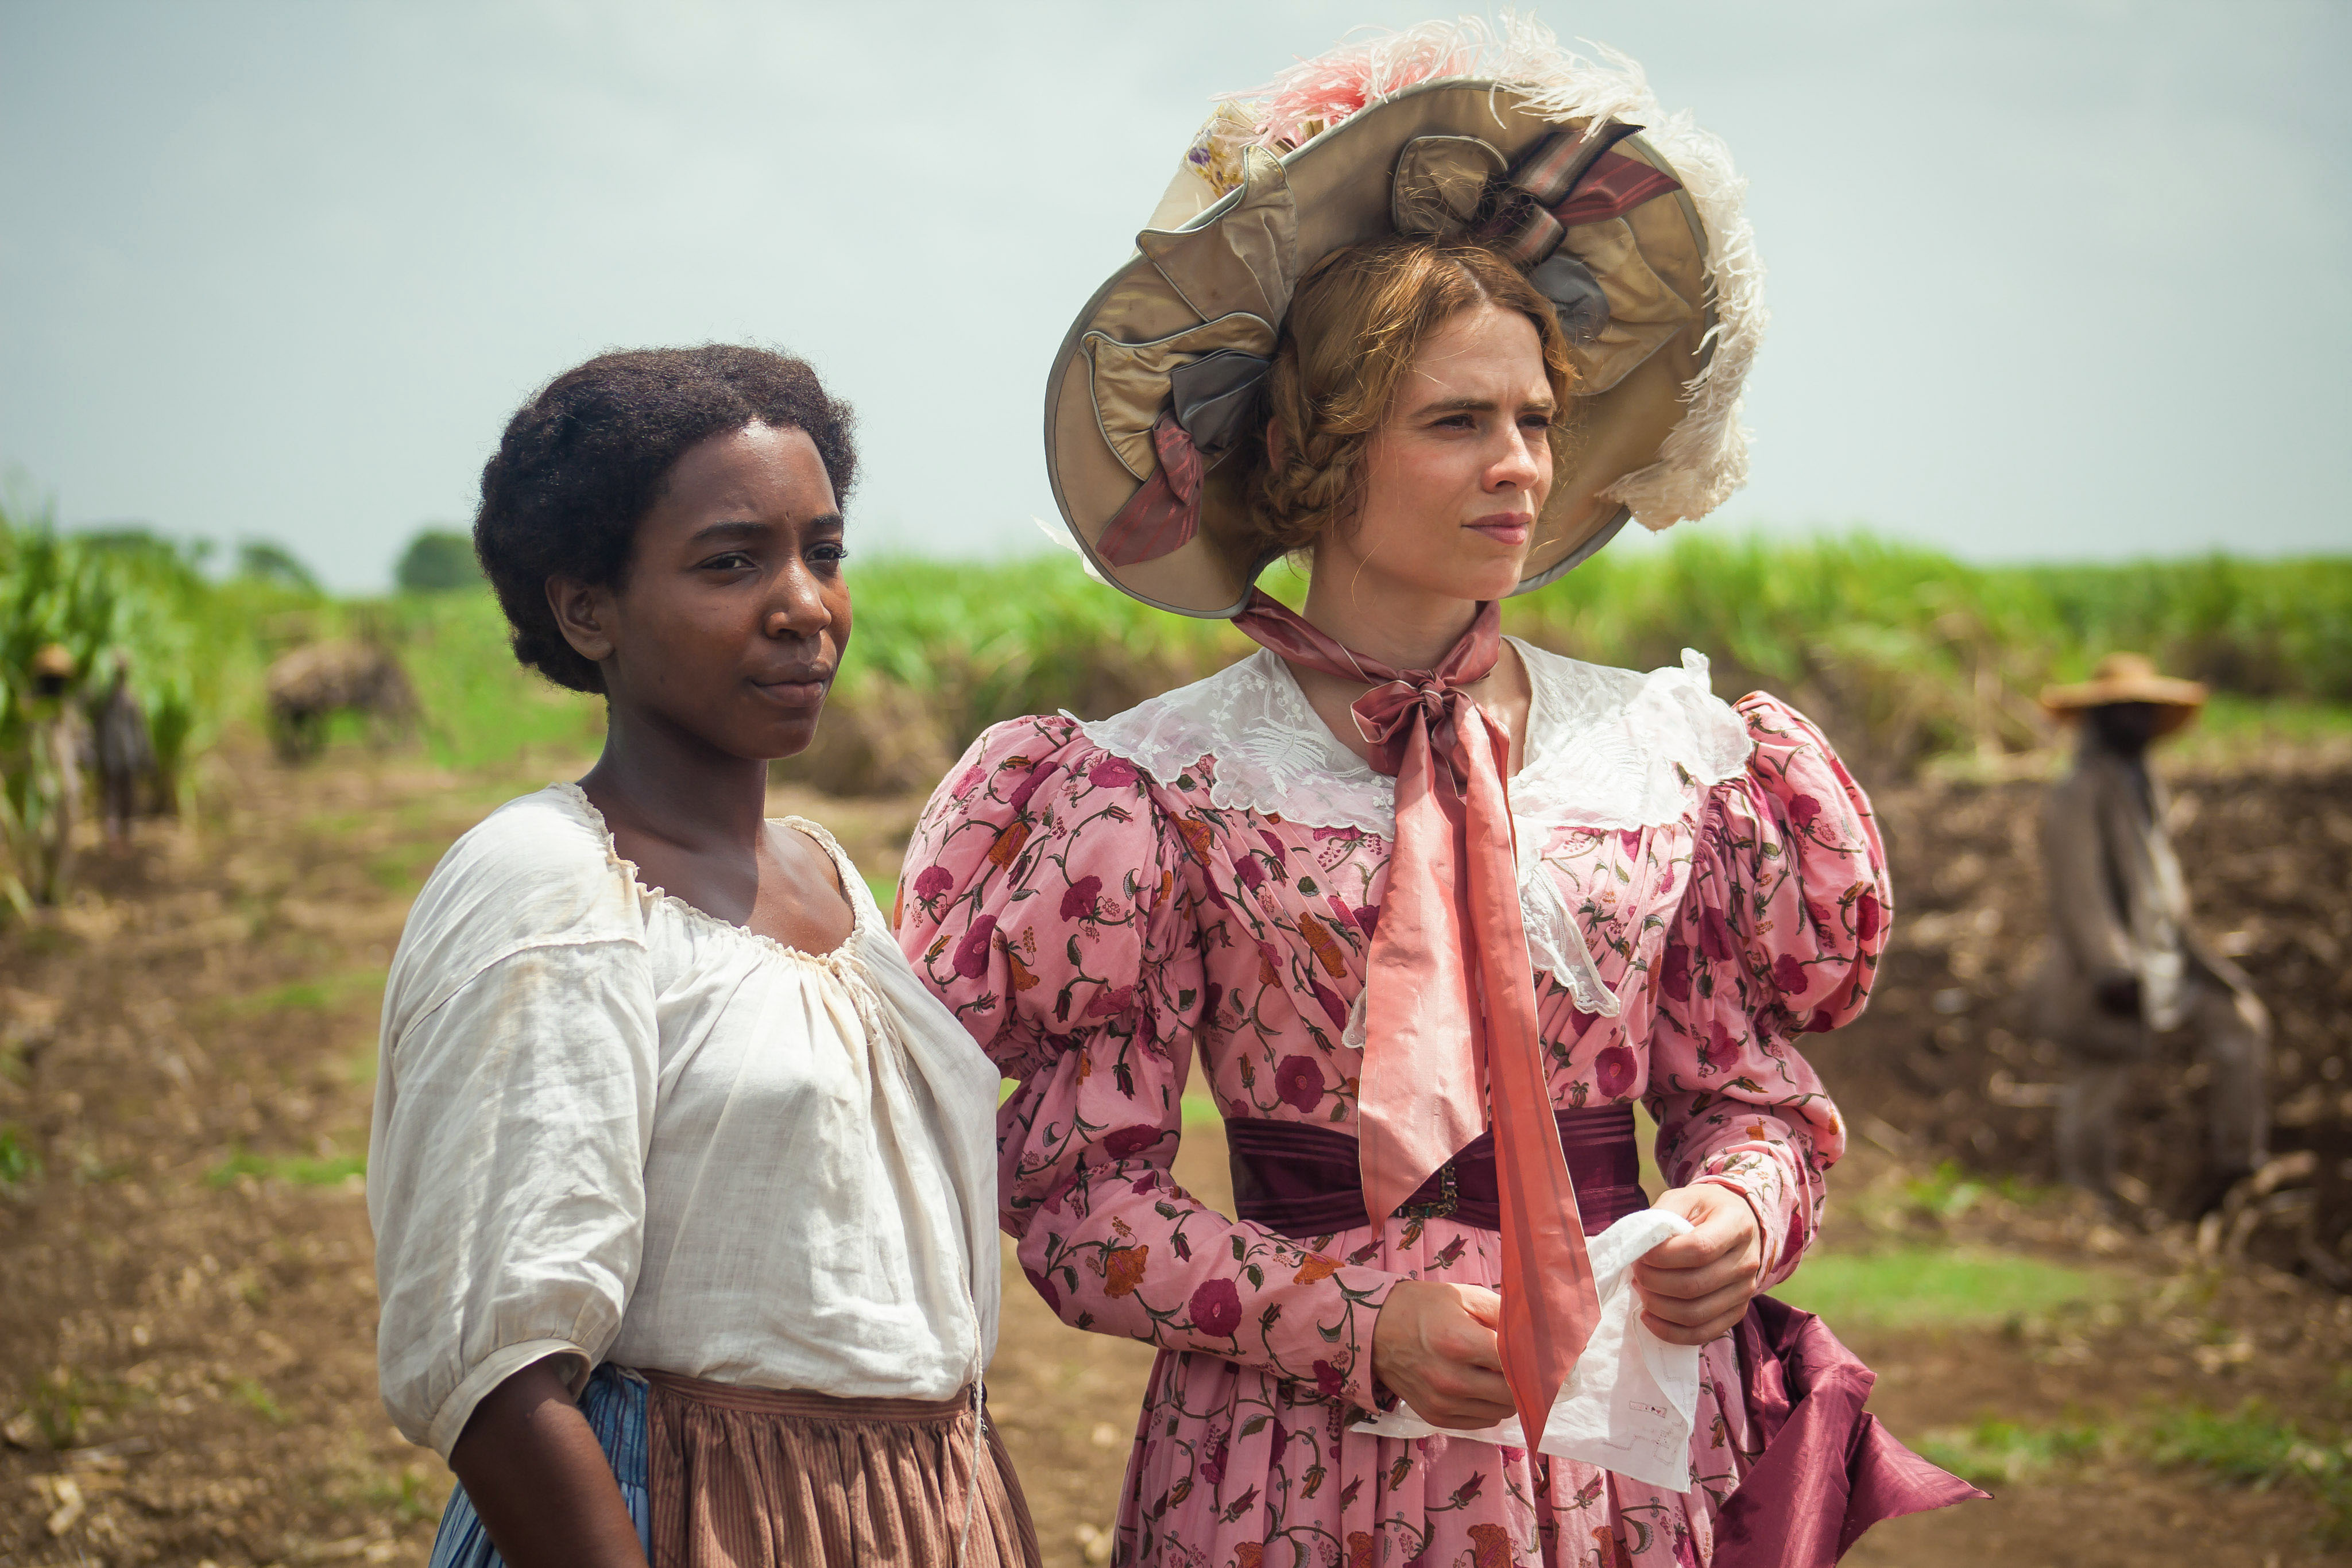 Tamara Lawrance (left) and Hayley Atwell in 'The Long Song' (Heyday Television/Carlos Rodriguez)